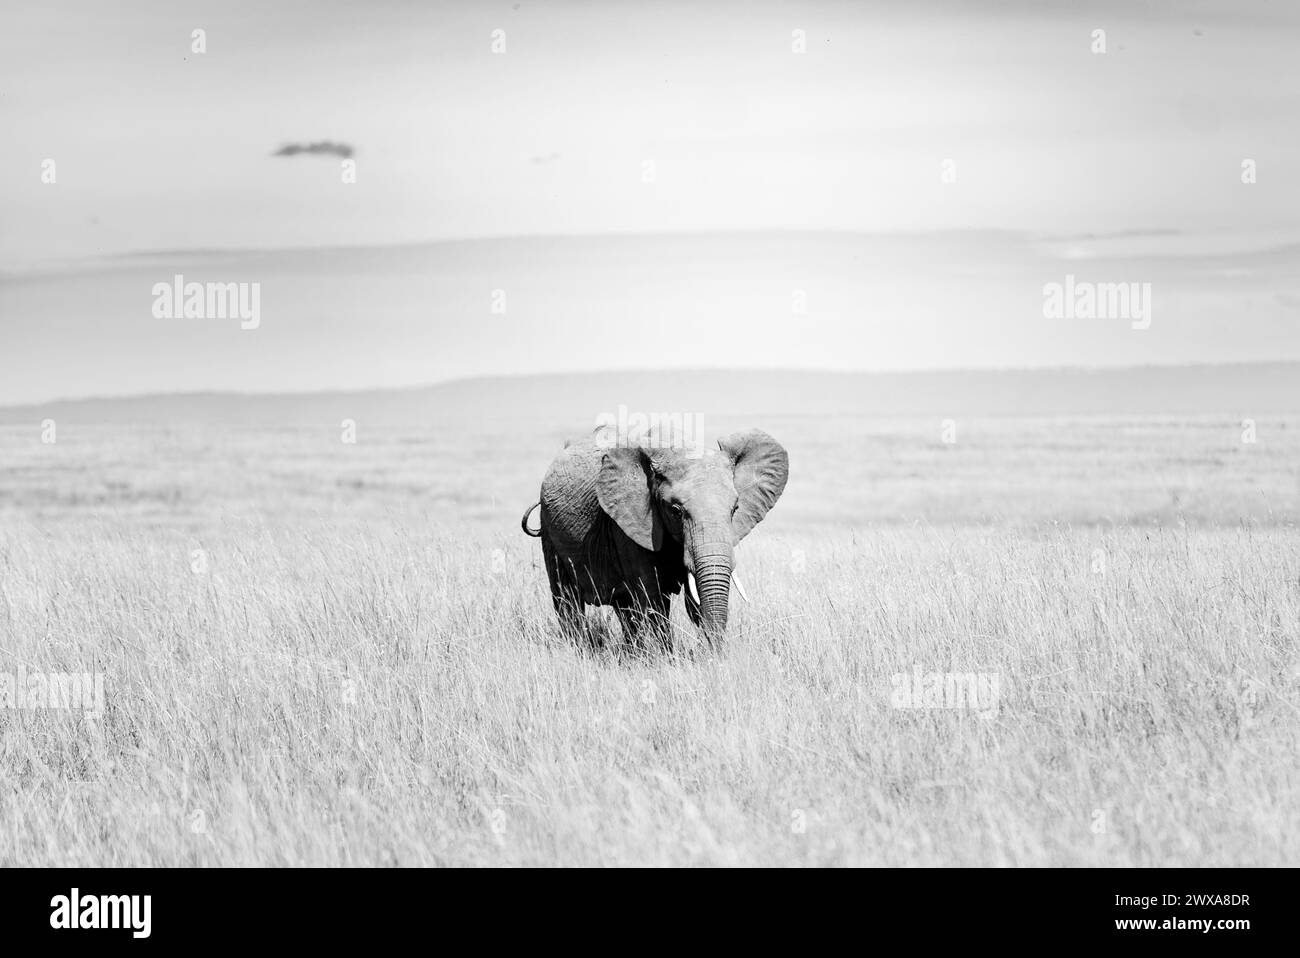 Elephants in the kenyan environment in the wonderful amboseli national reserve Stock Photo